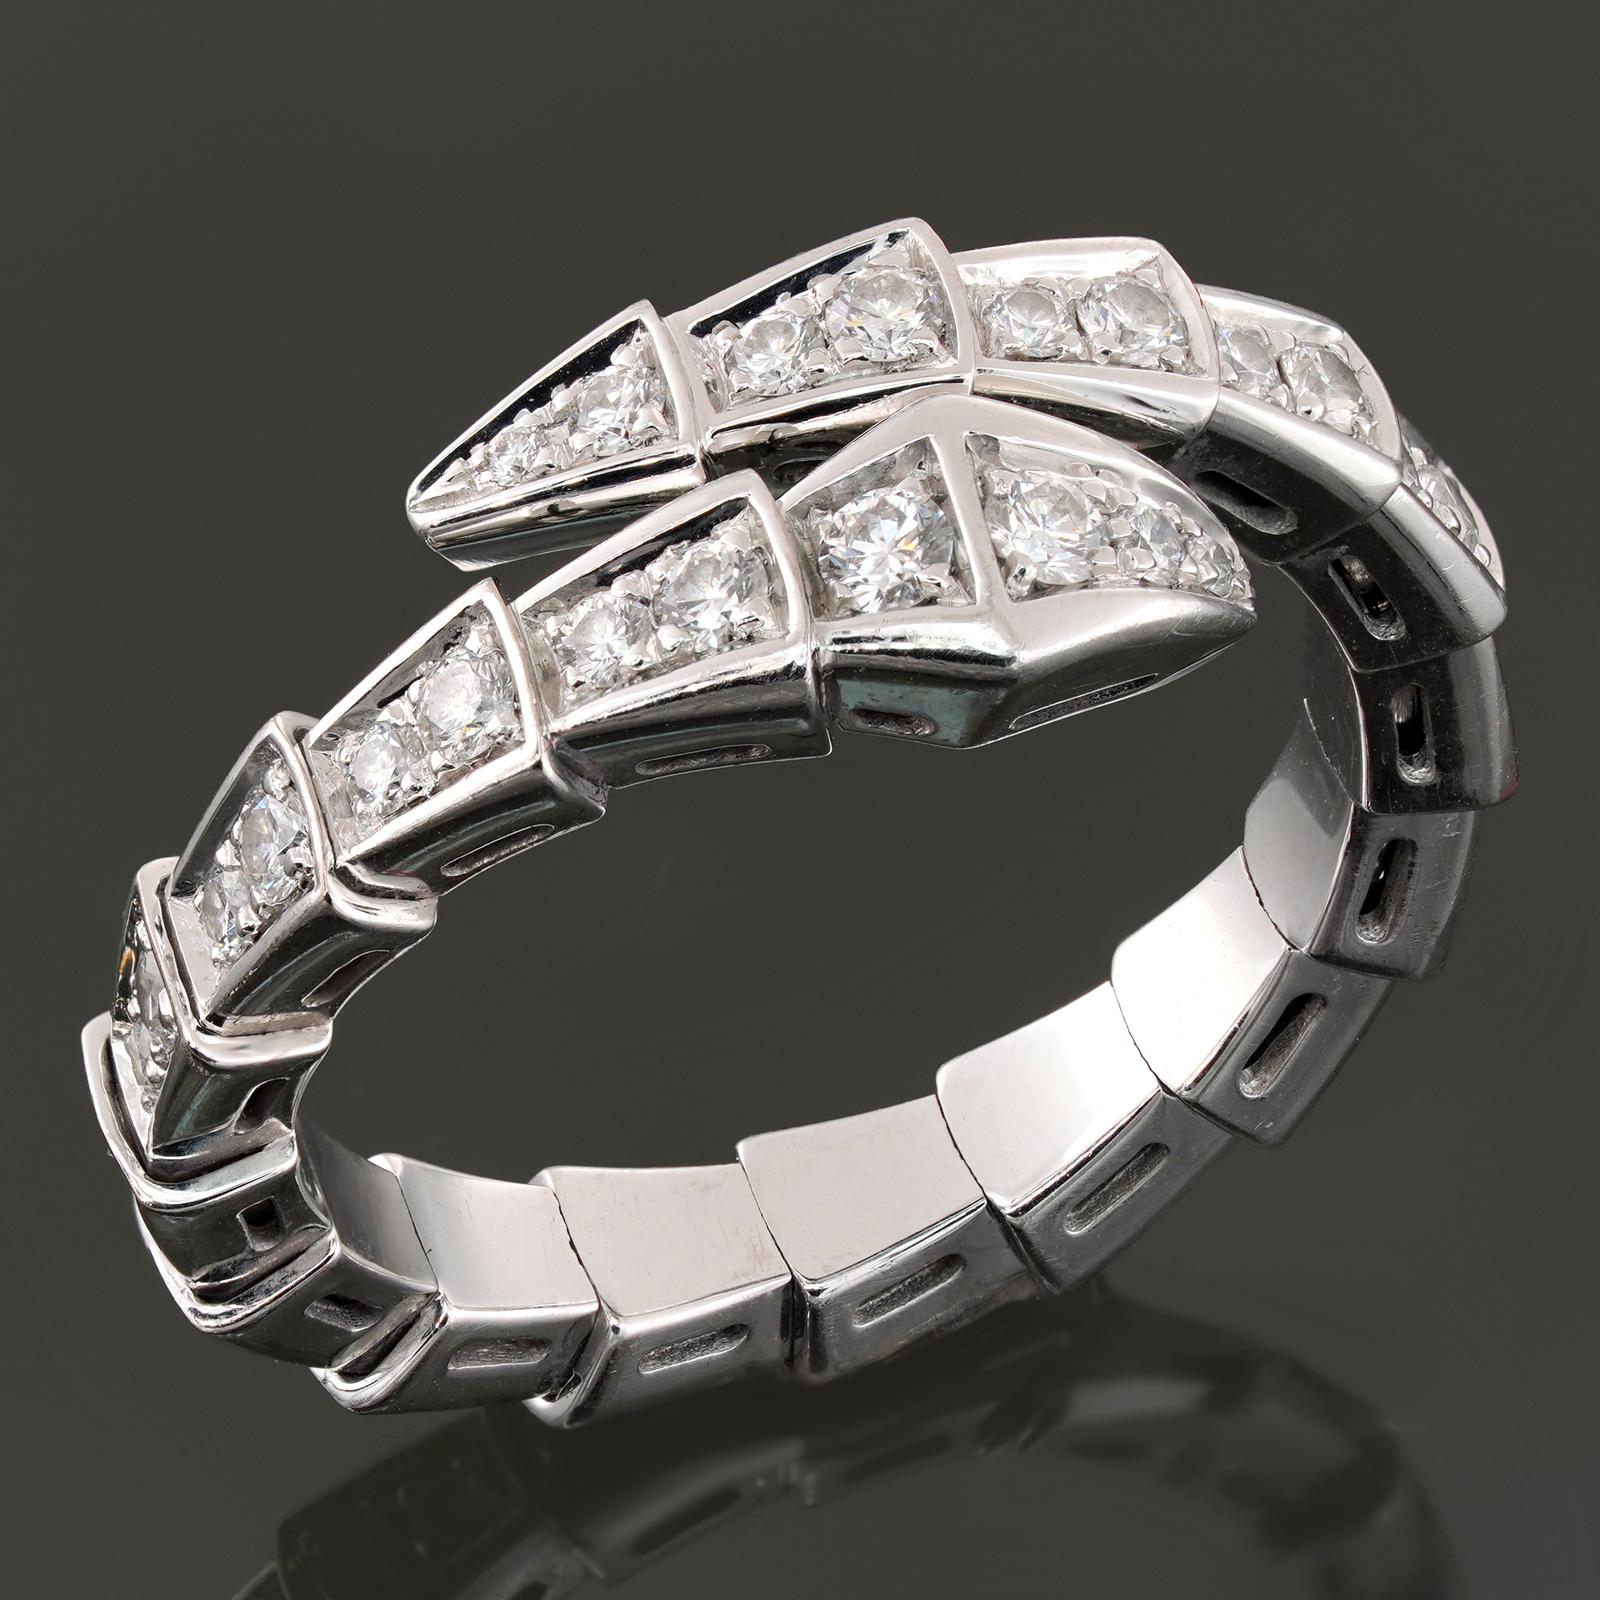 This gorgeous Bvlgari ring from the iconic Serpenti Viper collection features a double-row design crafted in 18k white gold and pave-set with brilliant-cut round D-E-F VVS1-VVS2 diamonds. The ring is flexible from sizes 6 3/4 to 7 3/4. Made in Italy